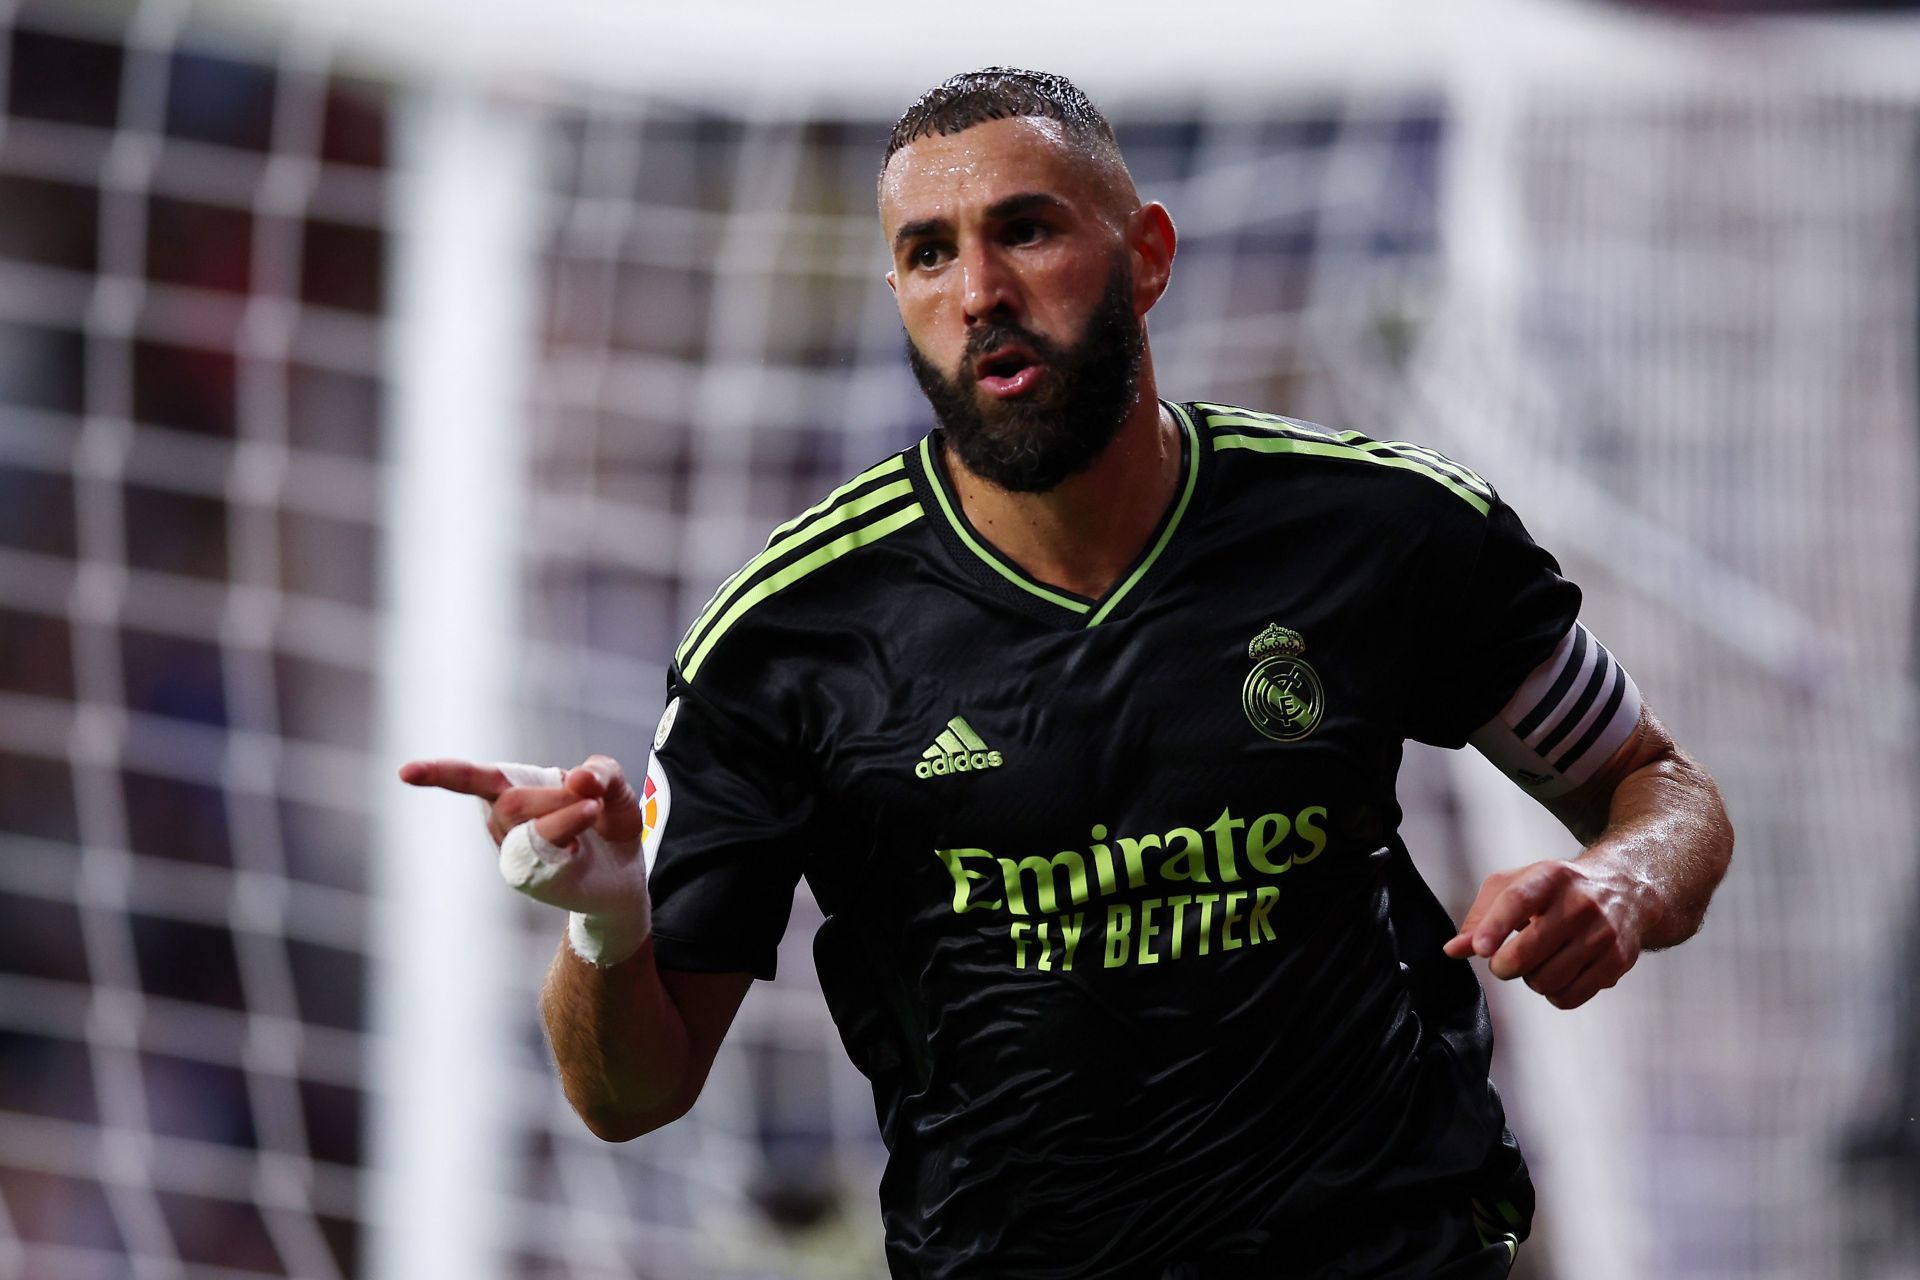 Karim Benzema has four goals and one assist from six games this season.